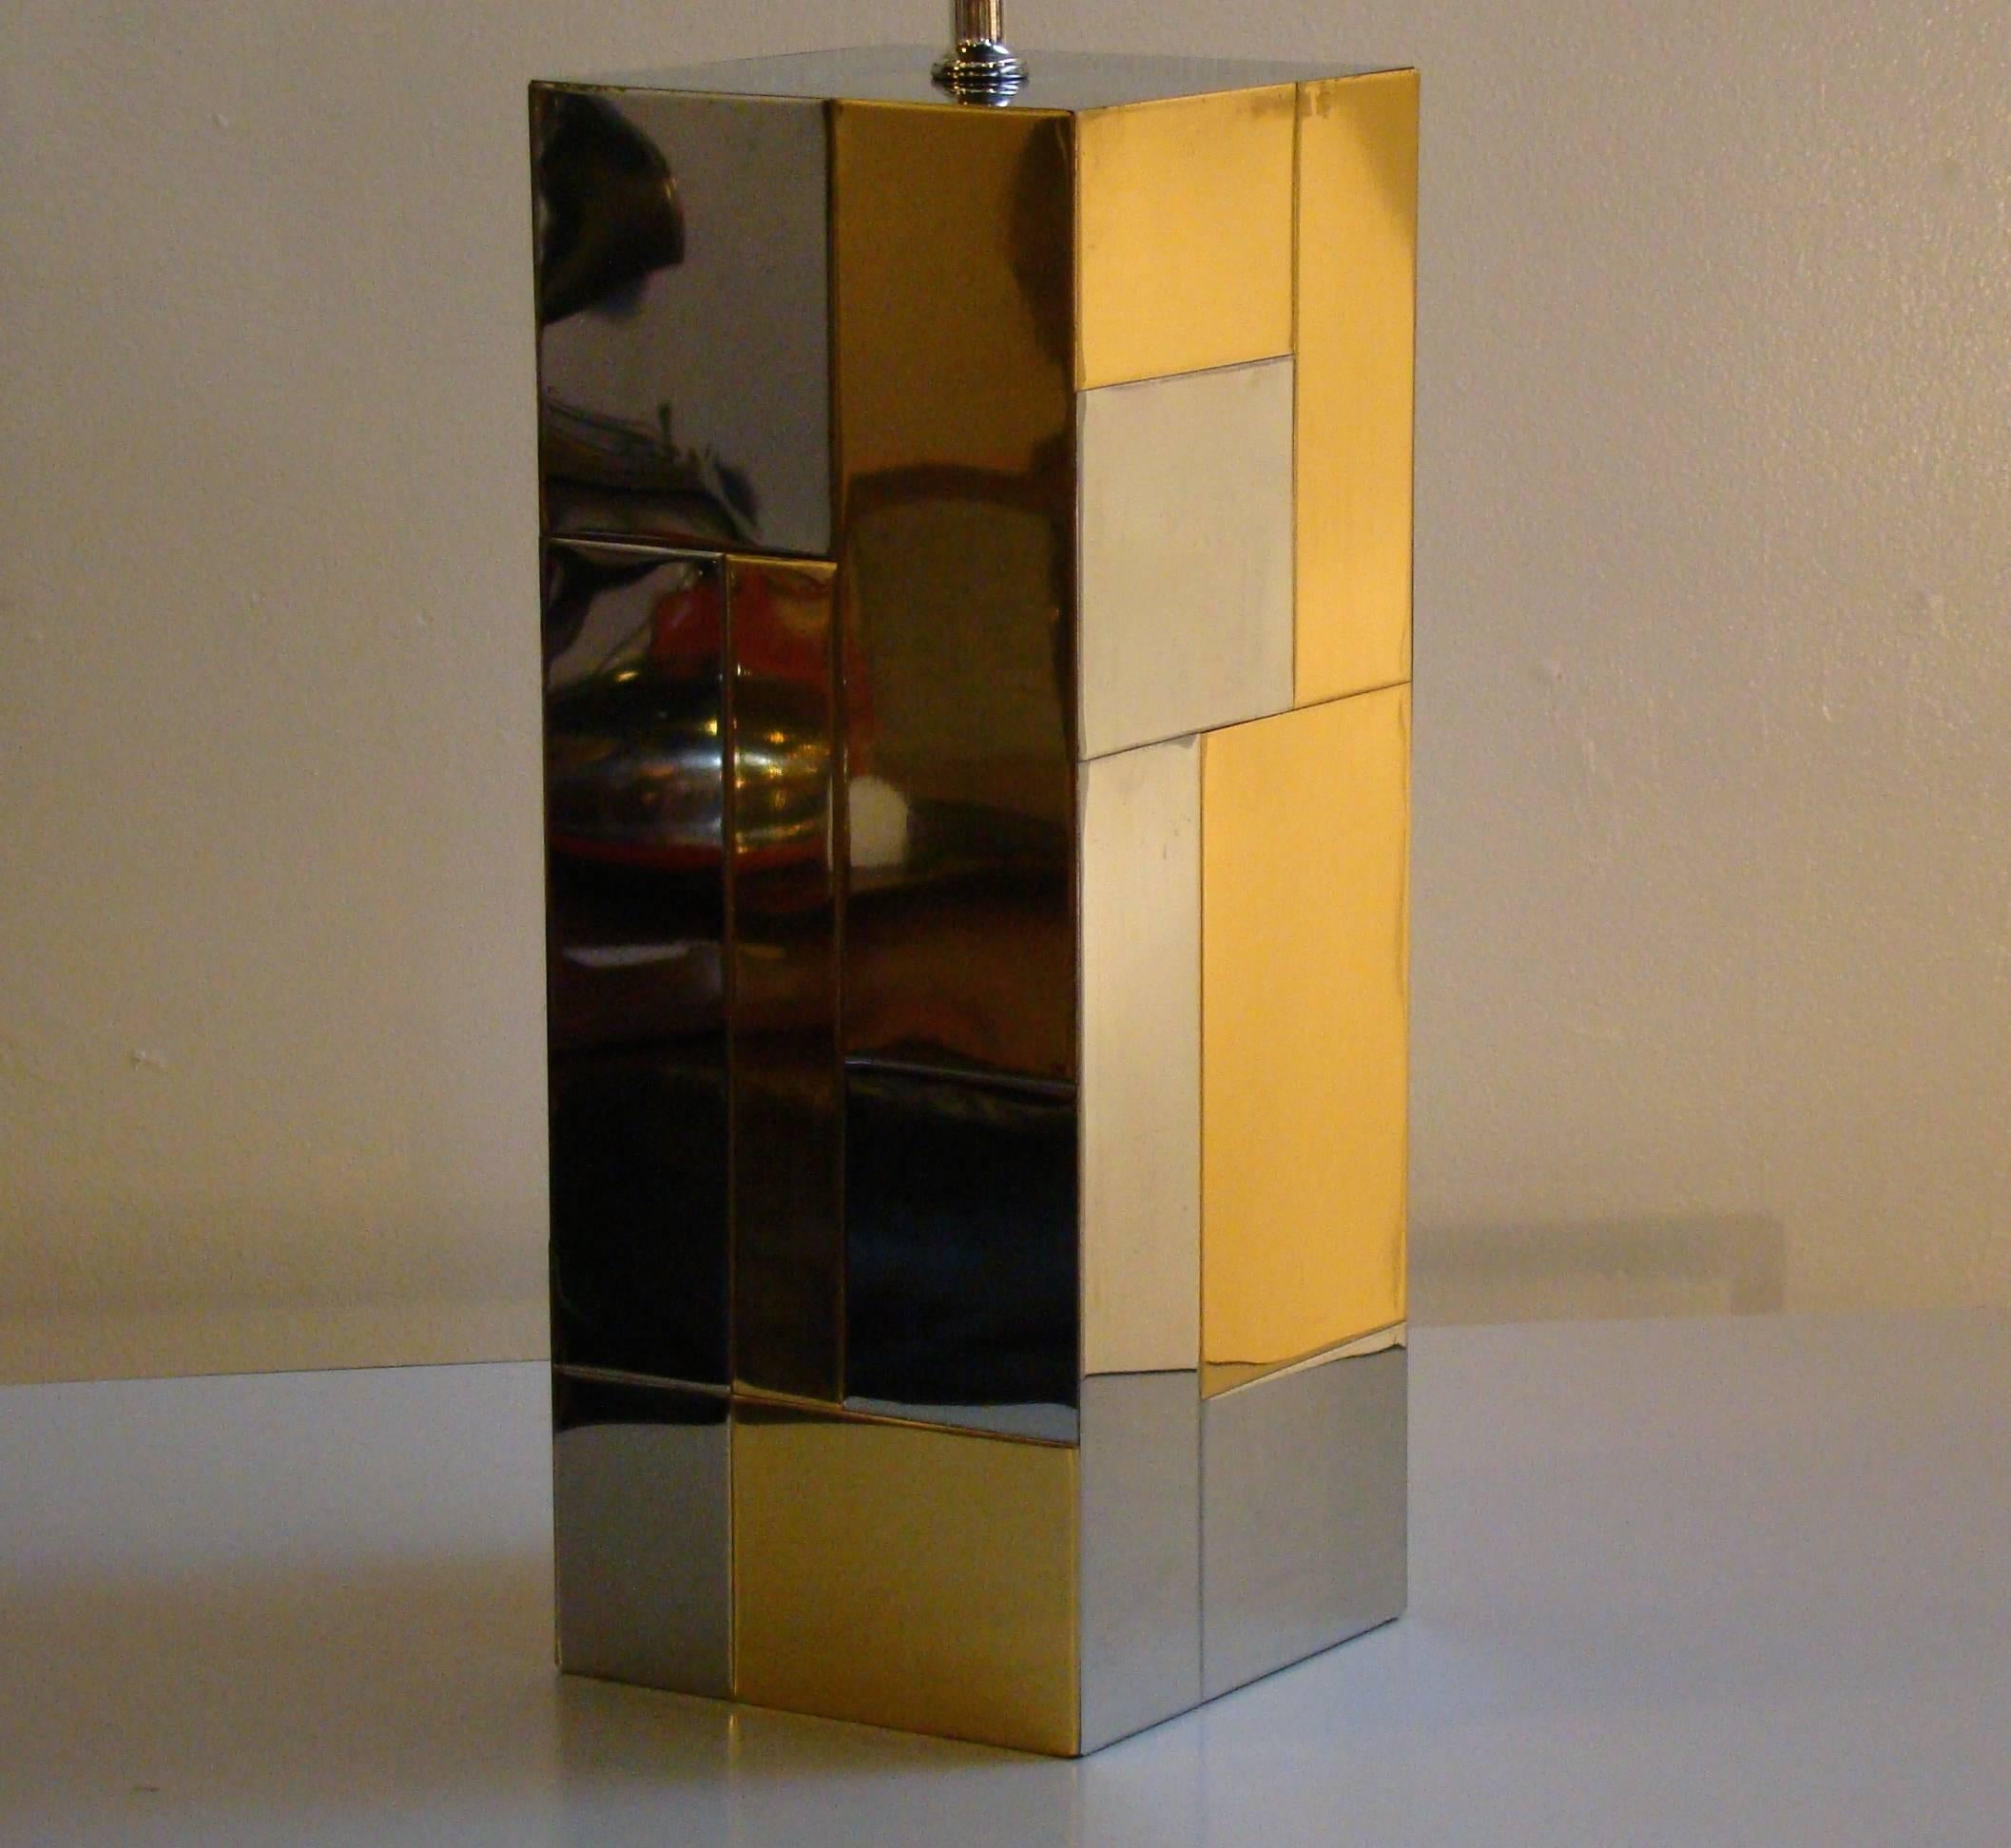 This table lamp features alternating chrome and brass patchwork on the base and the original shade and finial. This is the Cityscape series which Paul Evans designed for Directional furniture. Base measures 7.25 x 7.25 x 18. Illuminates the room